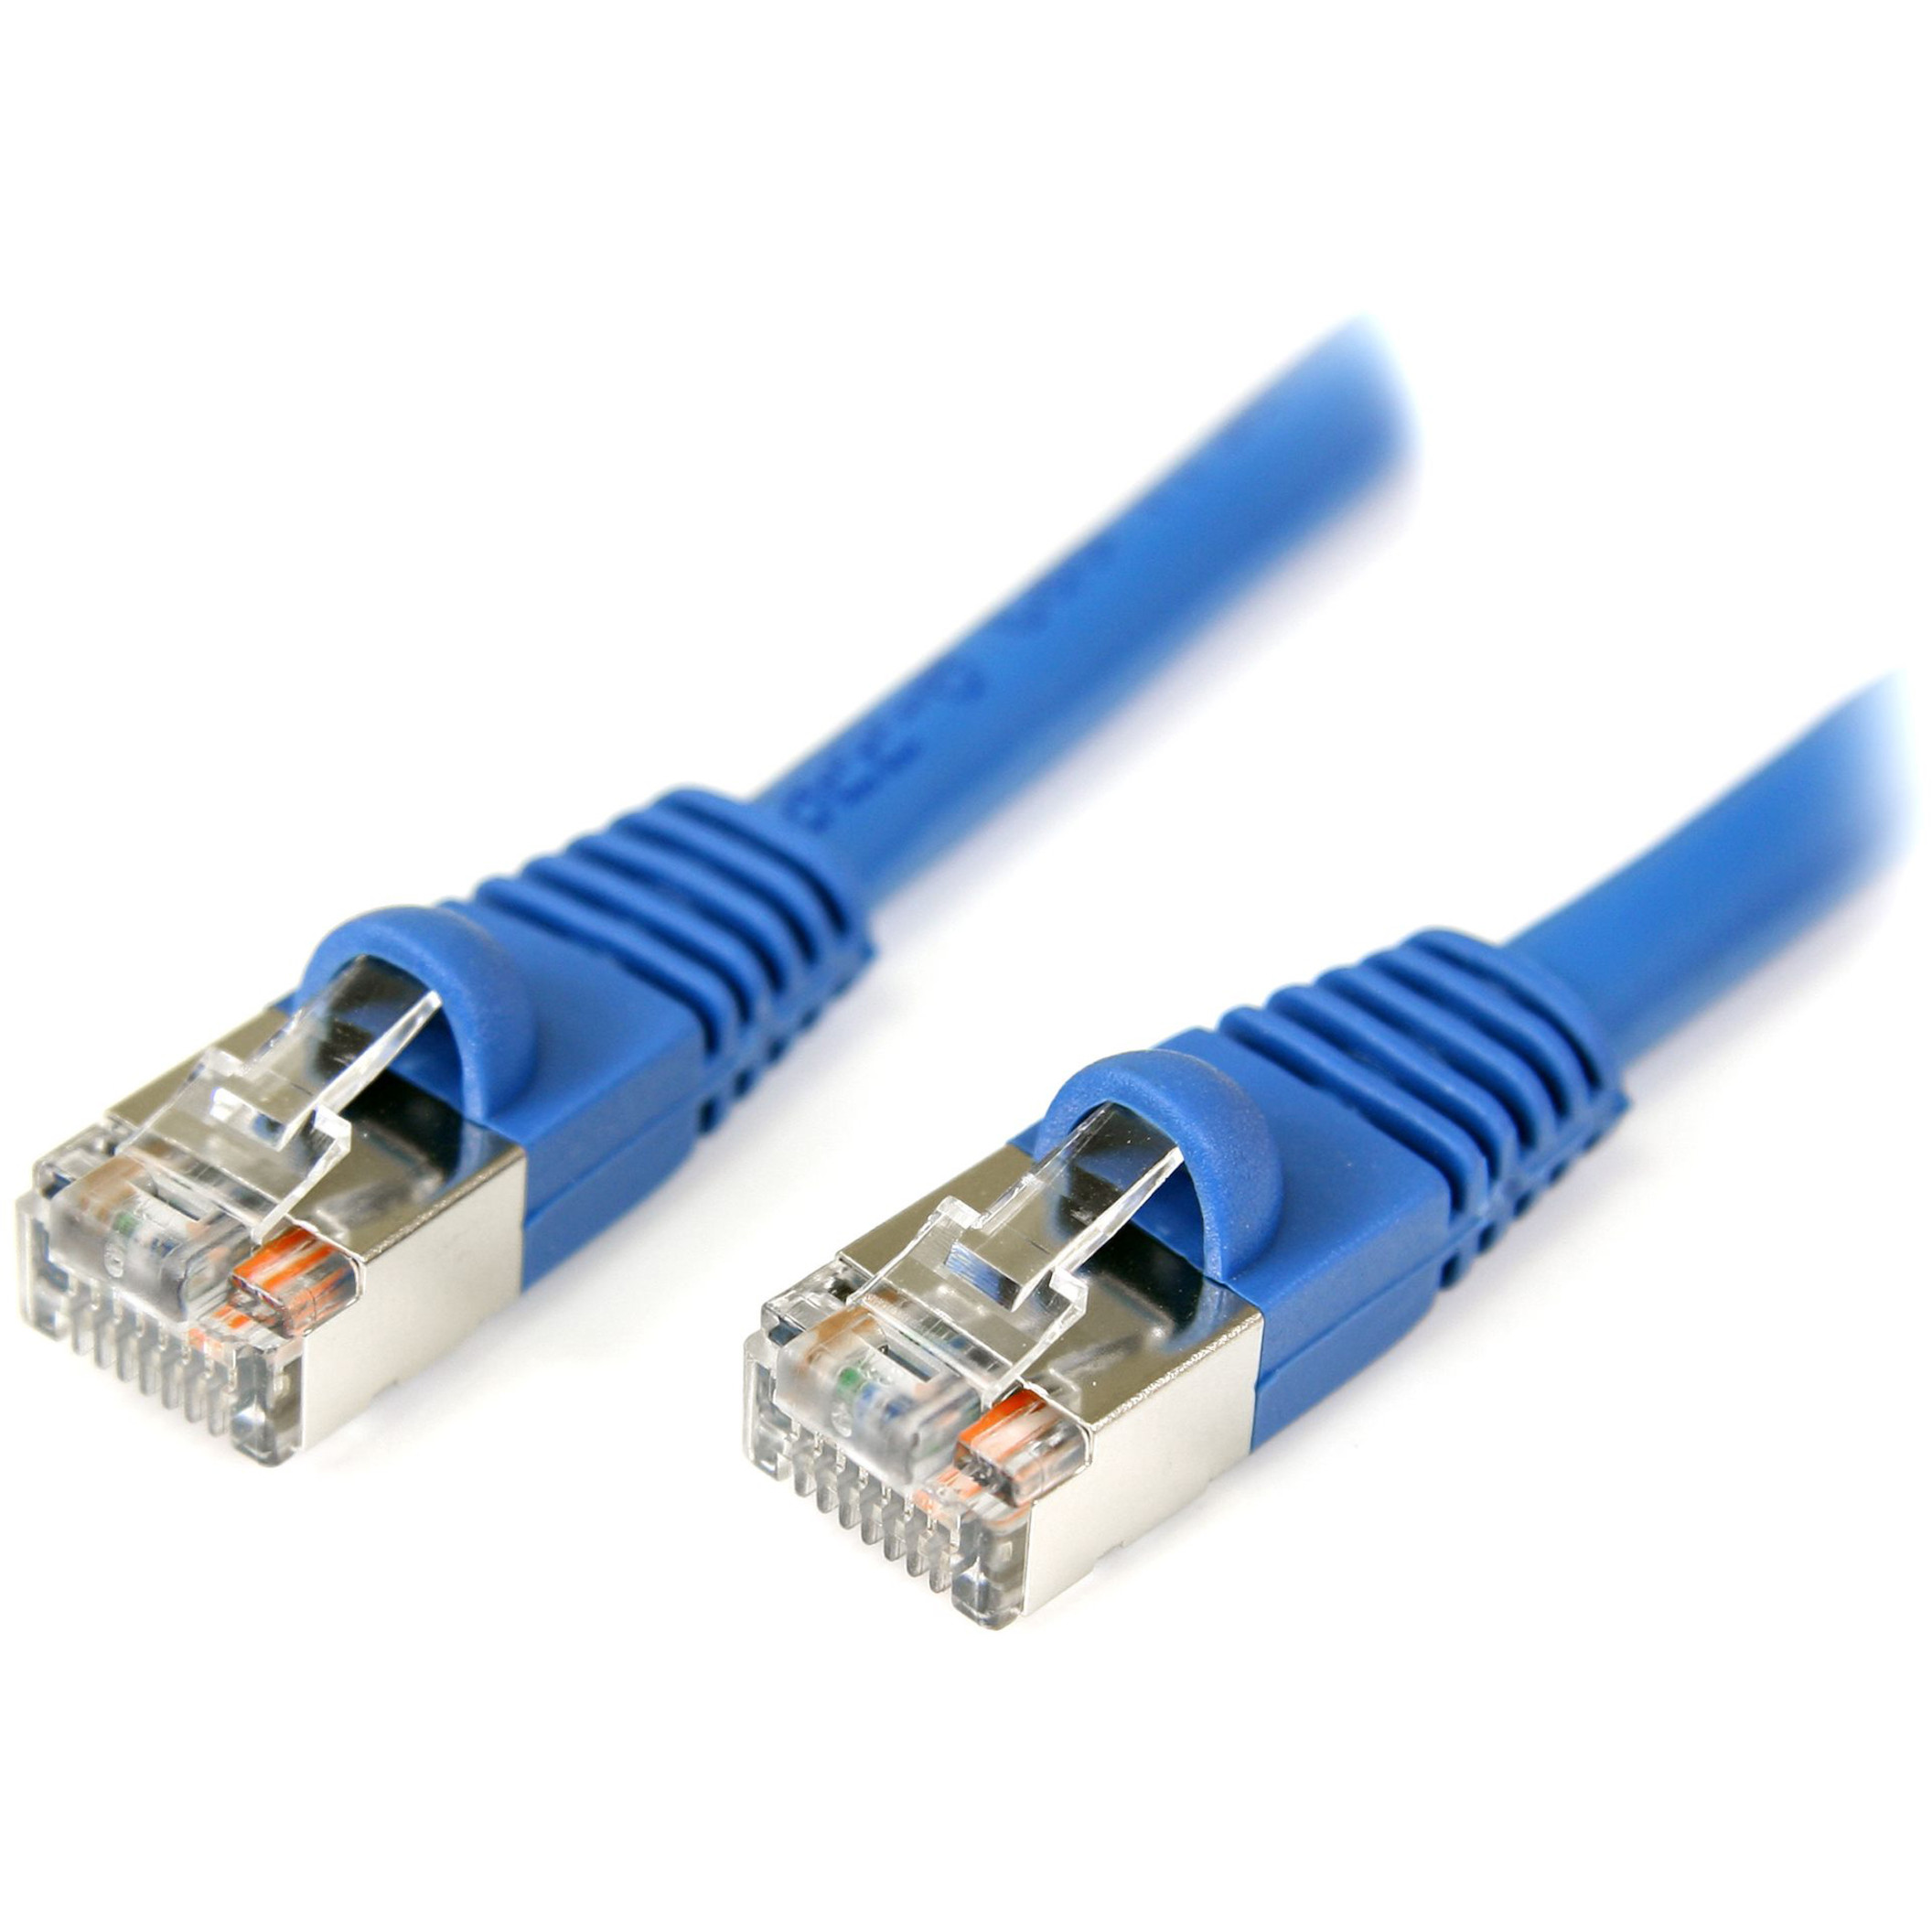 Startech .com 50 ft Blue Shielded Snagless Cat5e Patch CableMake Fast Ethernet network connections using this high quality shielded Cat5e… S45PATCH50BL